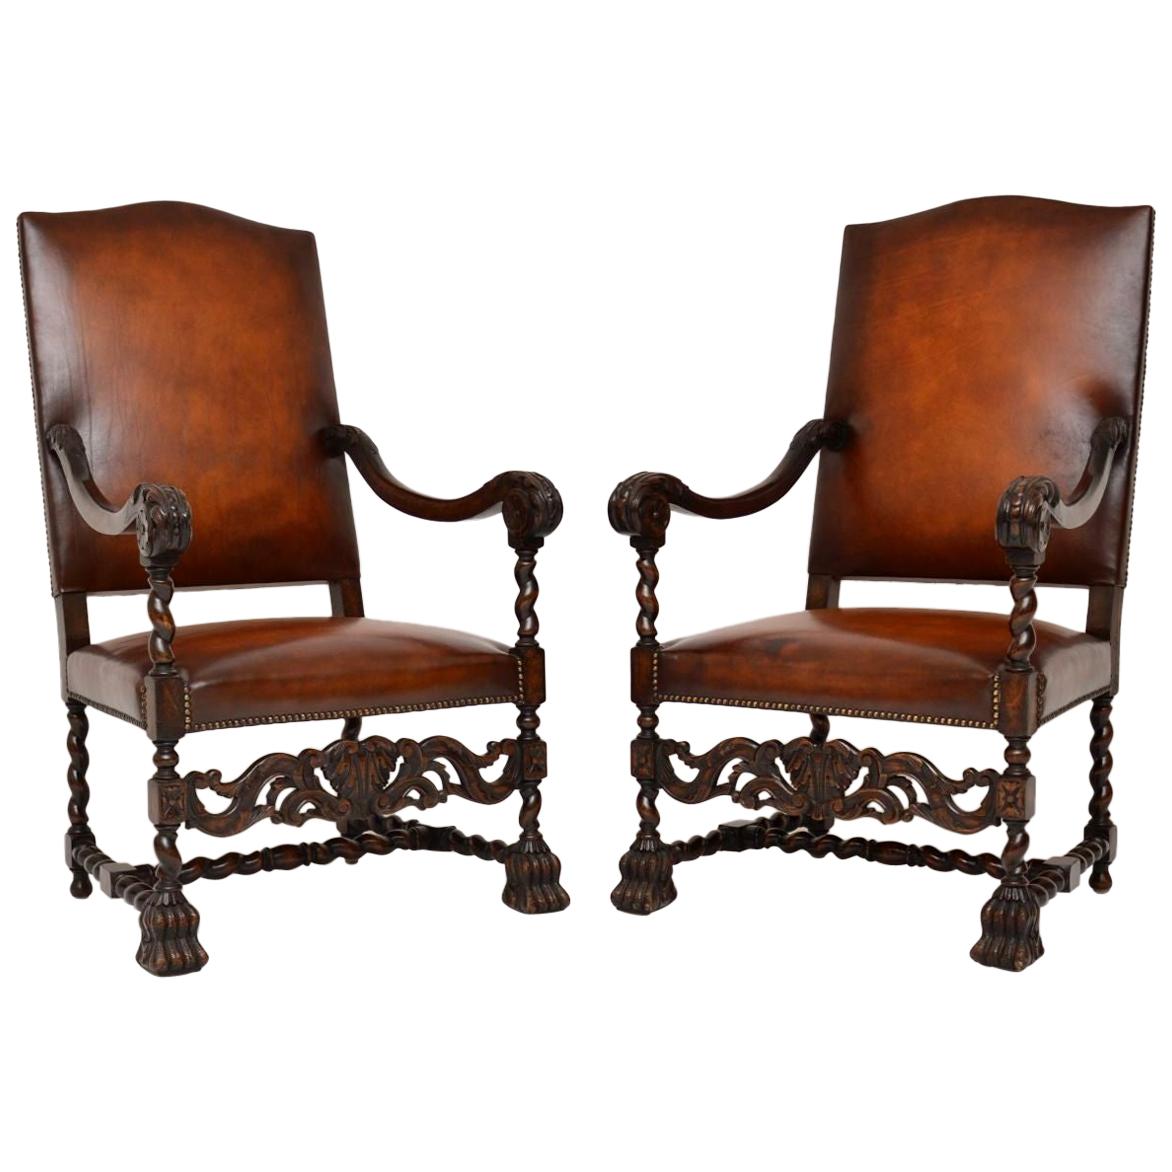 Pair of Antique Leather Upholstered Carved Oak Carolean Armchairs